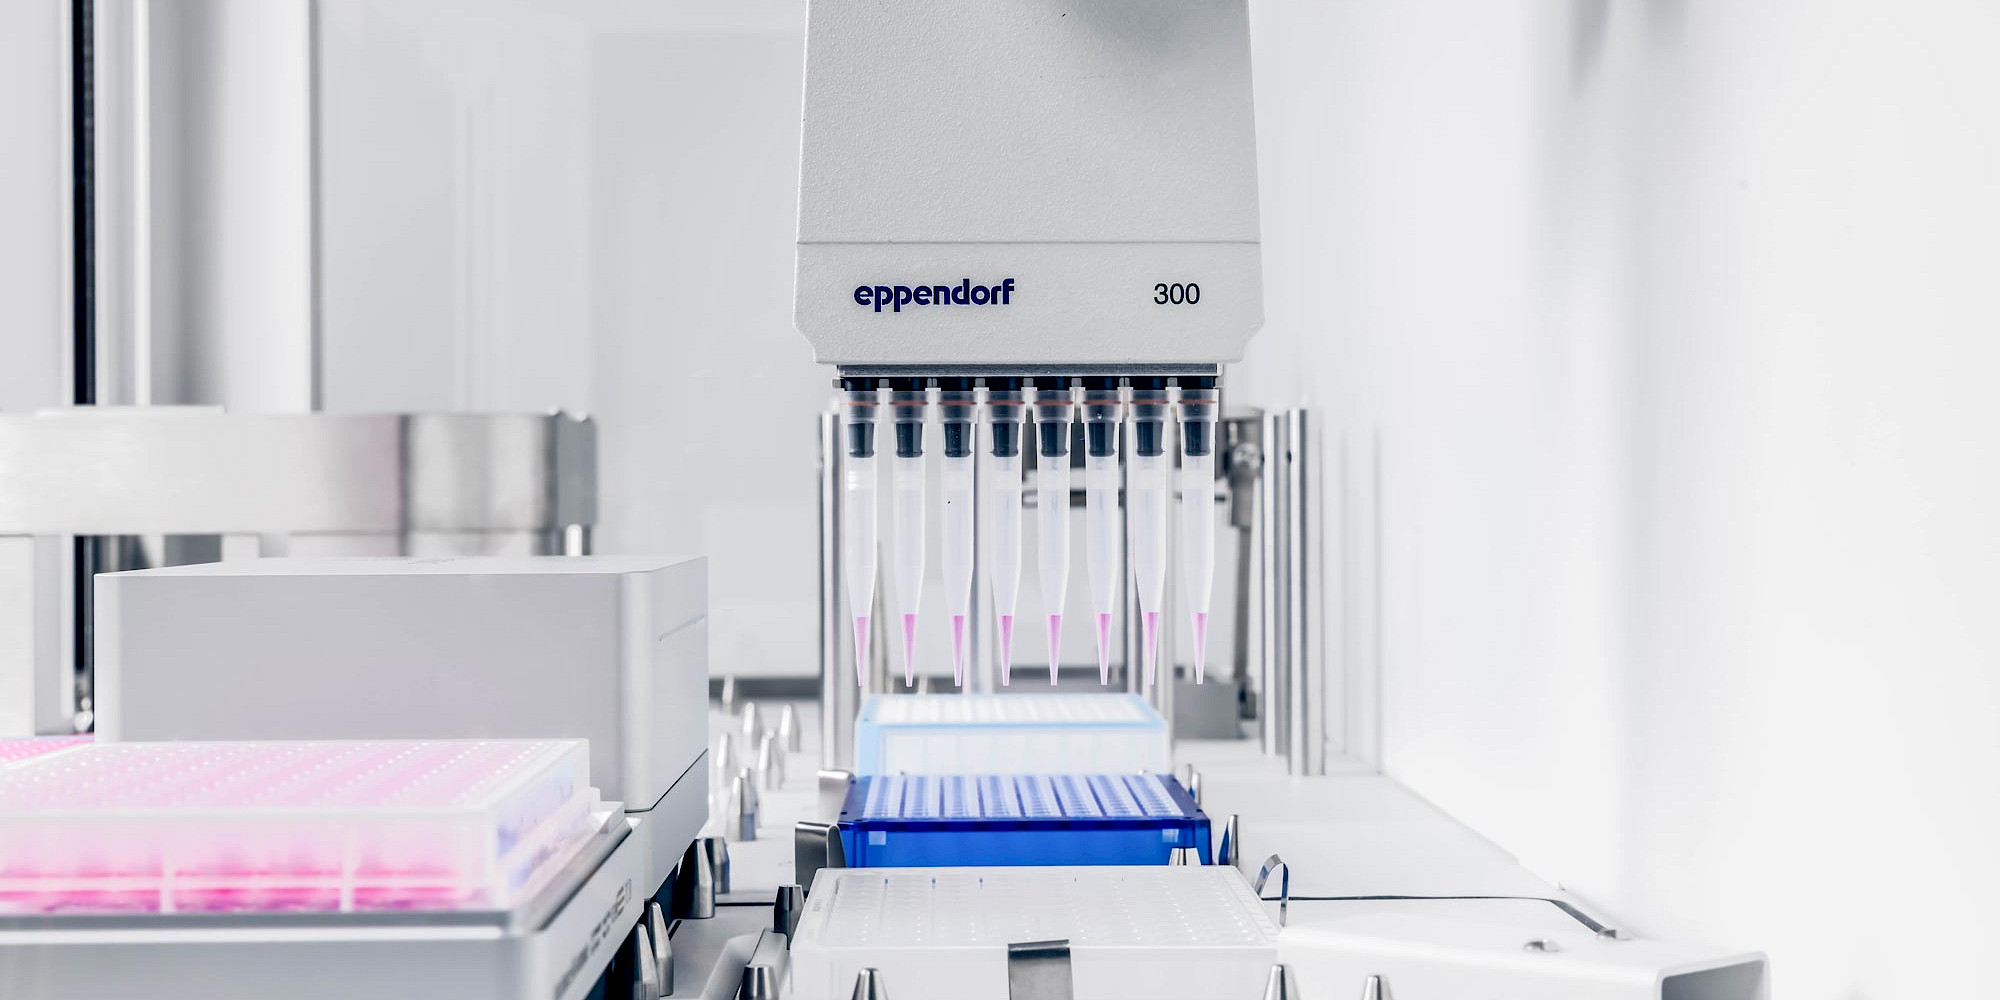  Performance Validation of Absorbance 96 Automate Integrated on the Eppendorf® epMotion® Deck for Automated Cell-Based Assay Employing CytoTox 96® Kit Journal Byonoy